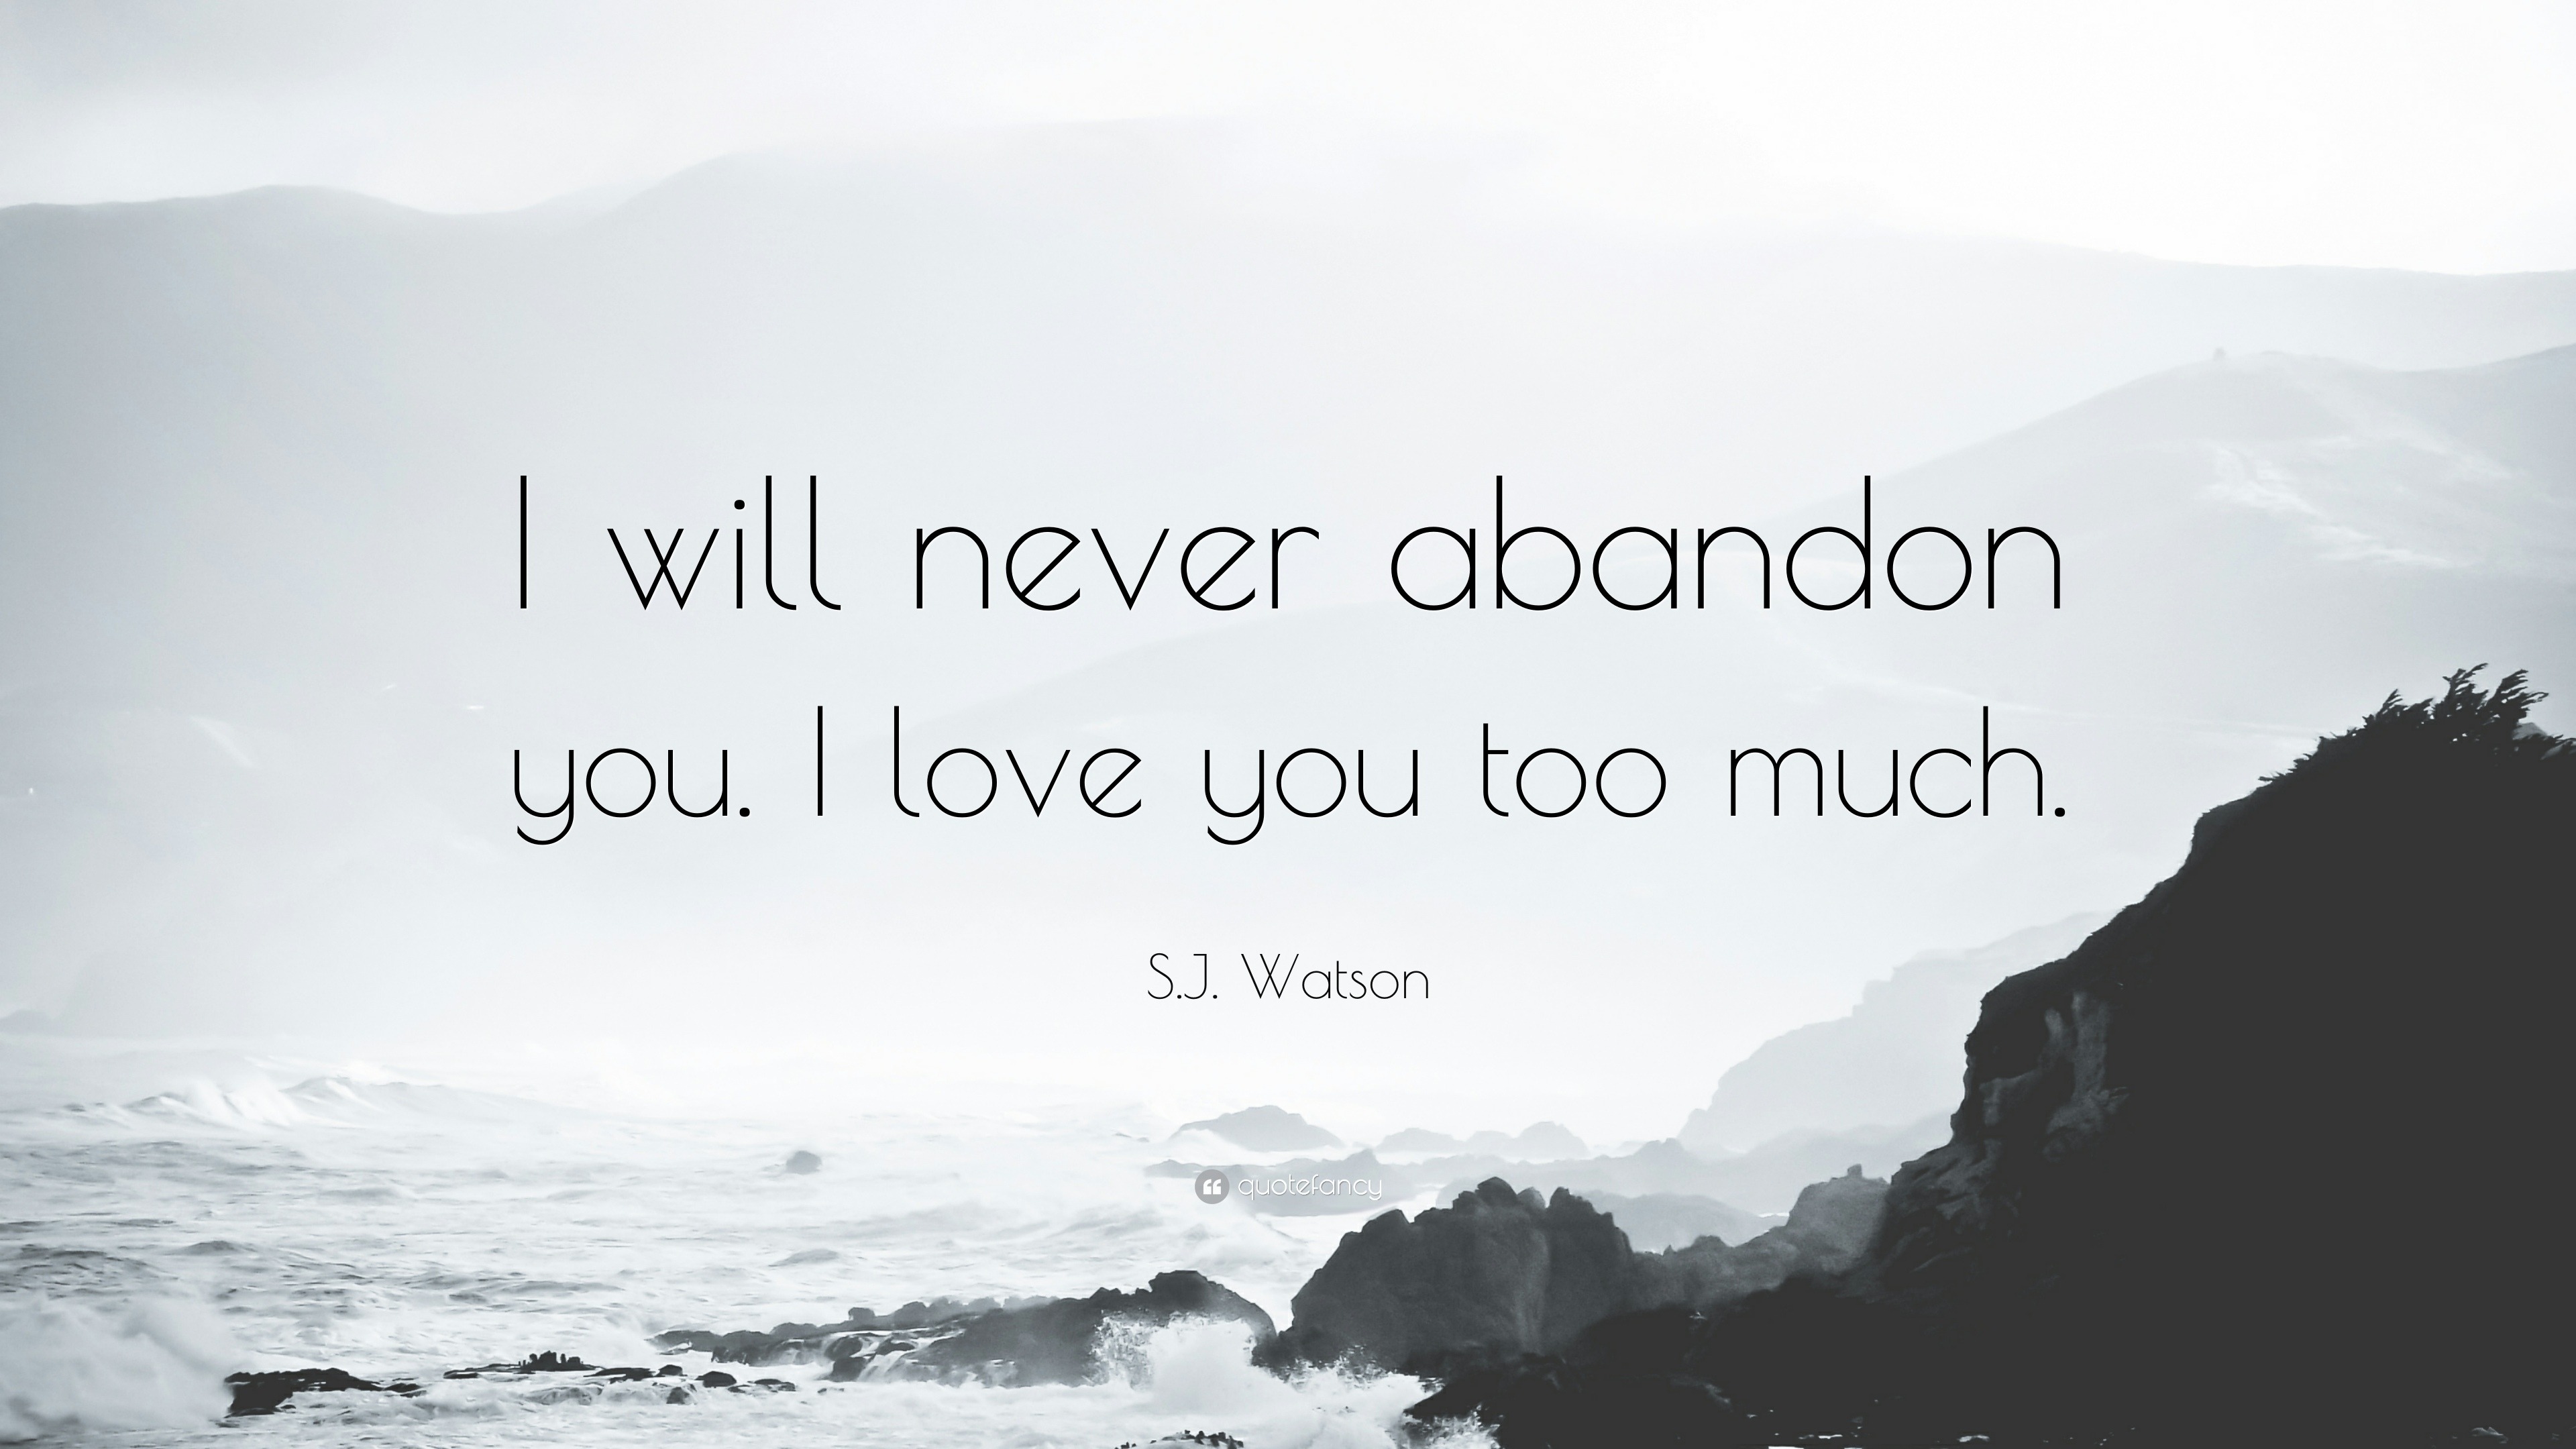 S J Watson Quote “I will never abandon you I love you too much